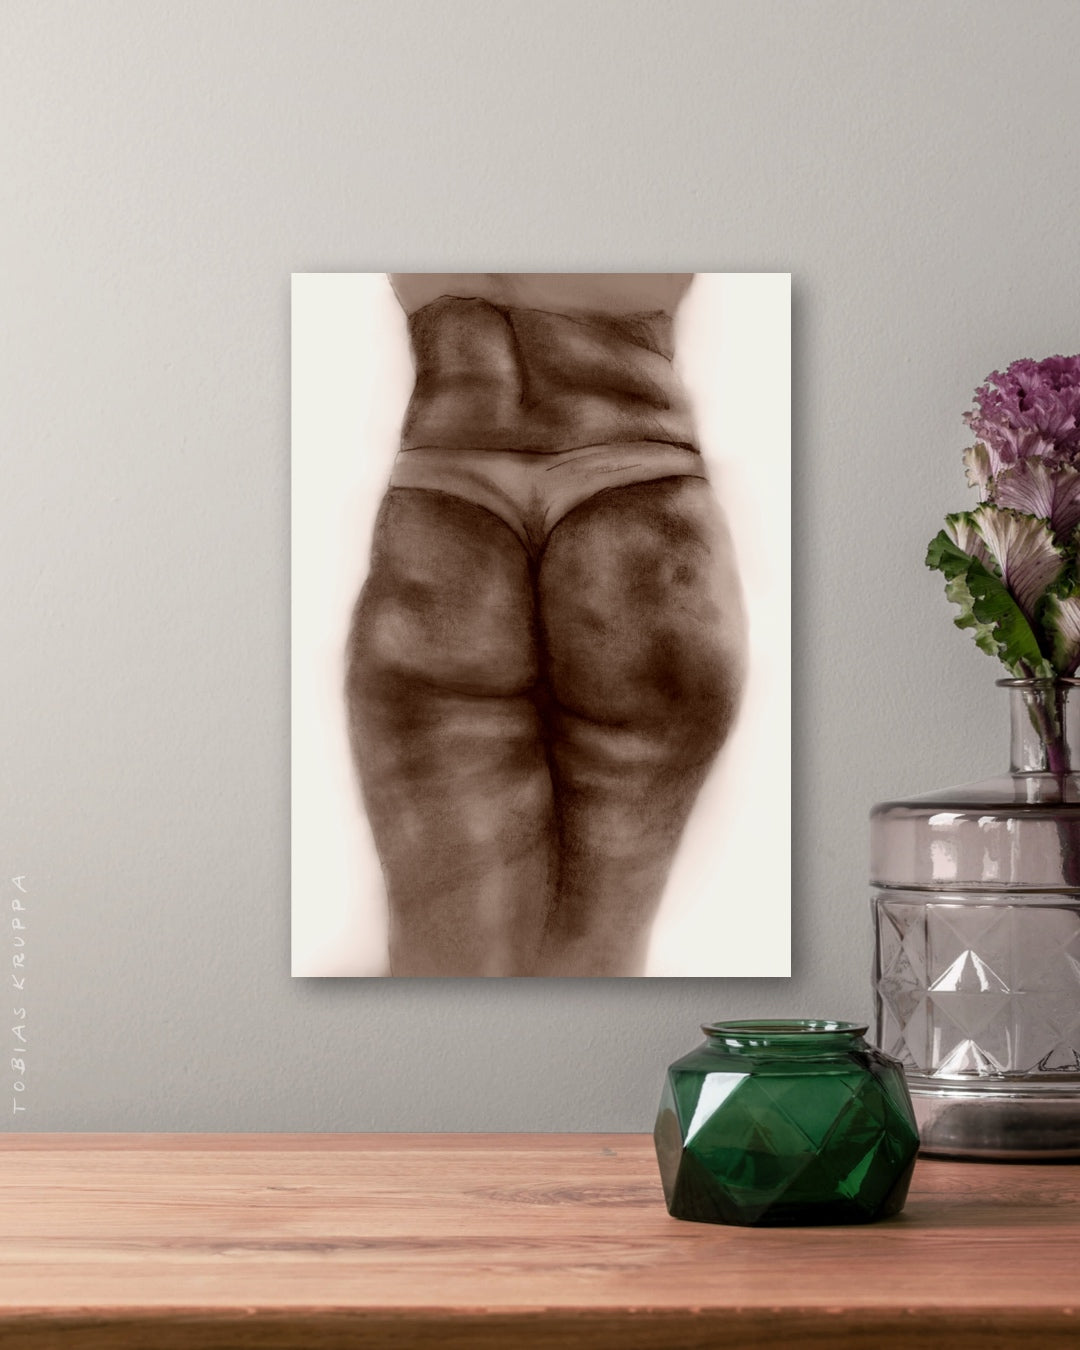 Personalized commissioned artworks of women's bottoms, rendered in stunning detail and available as fine art prints